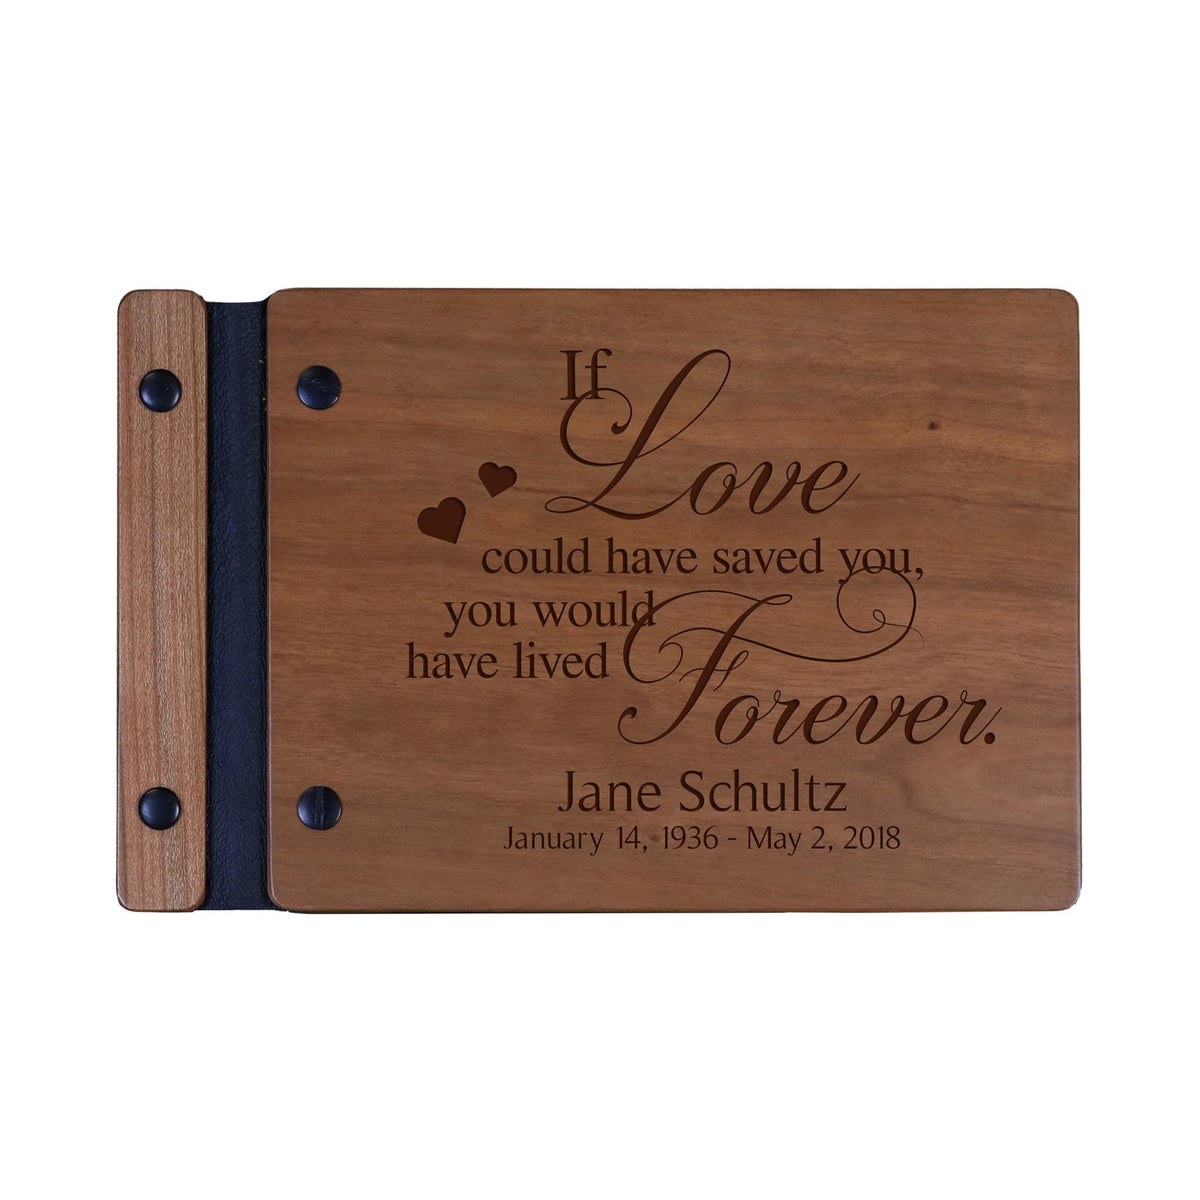 Custom Engraved Wooden Memorial Guestbook 9.375” x 6” x .75” If Love Could Have Saved You - LifeSong Milestones